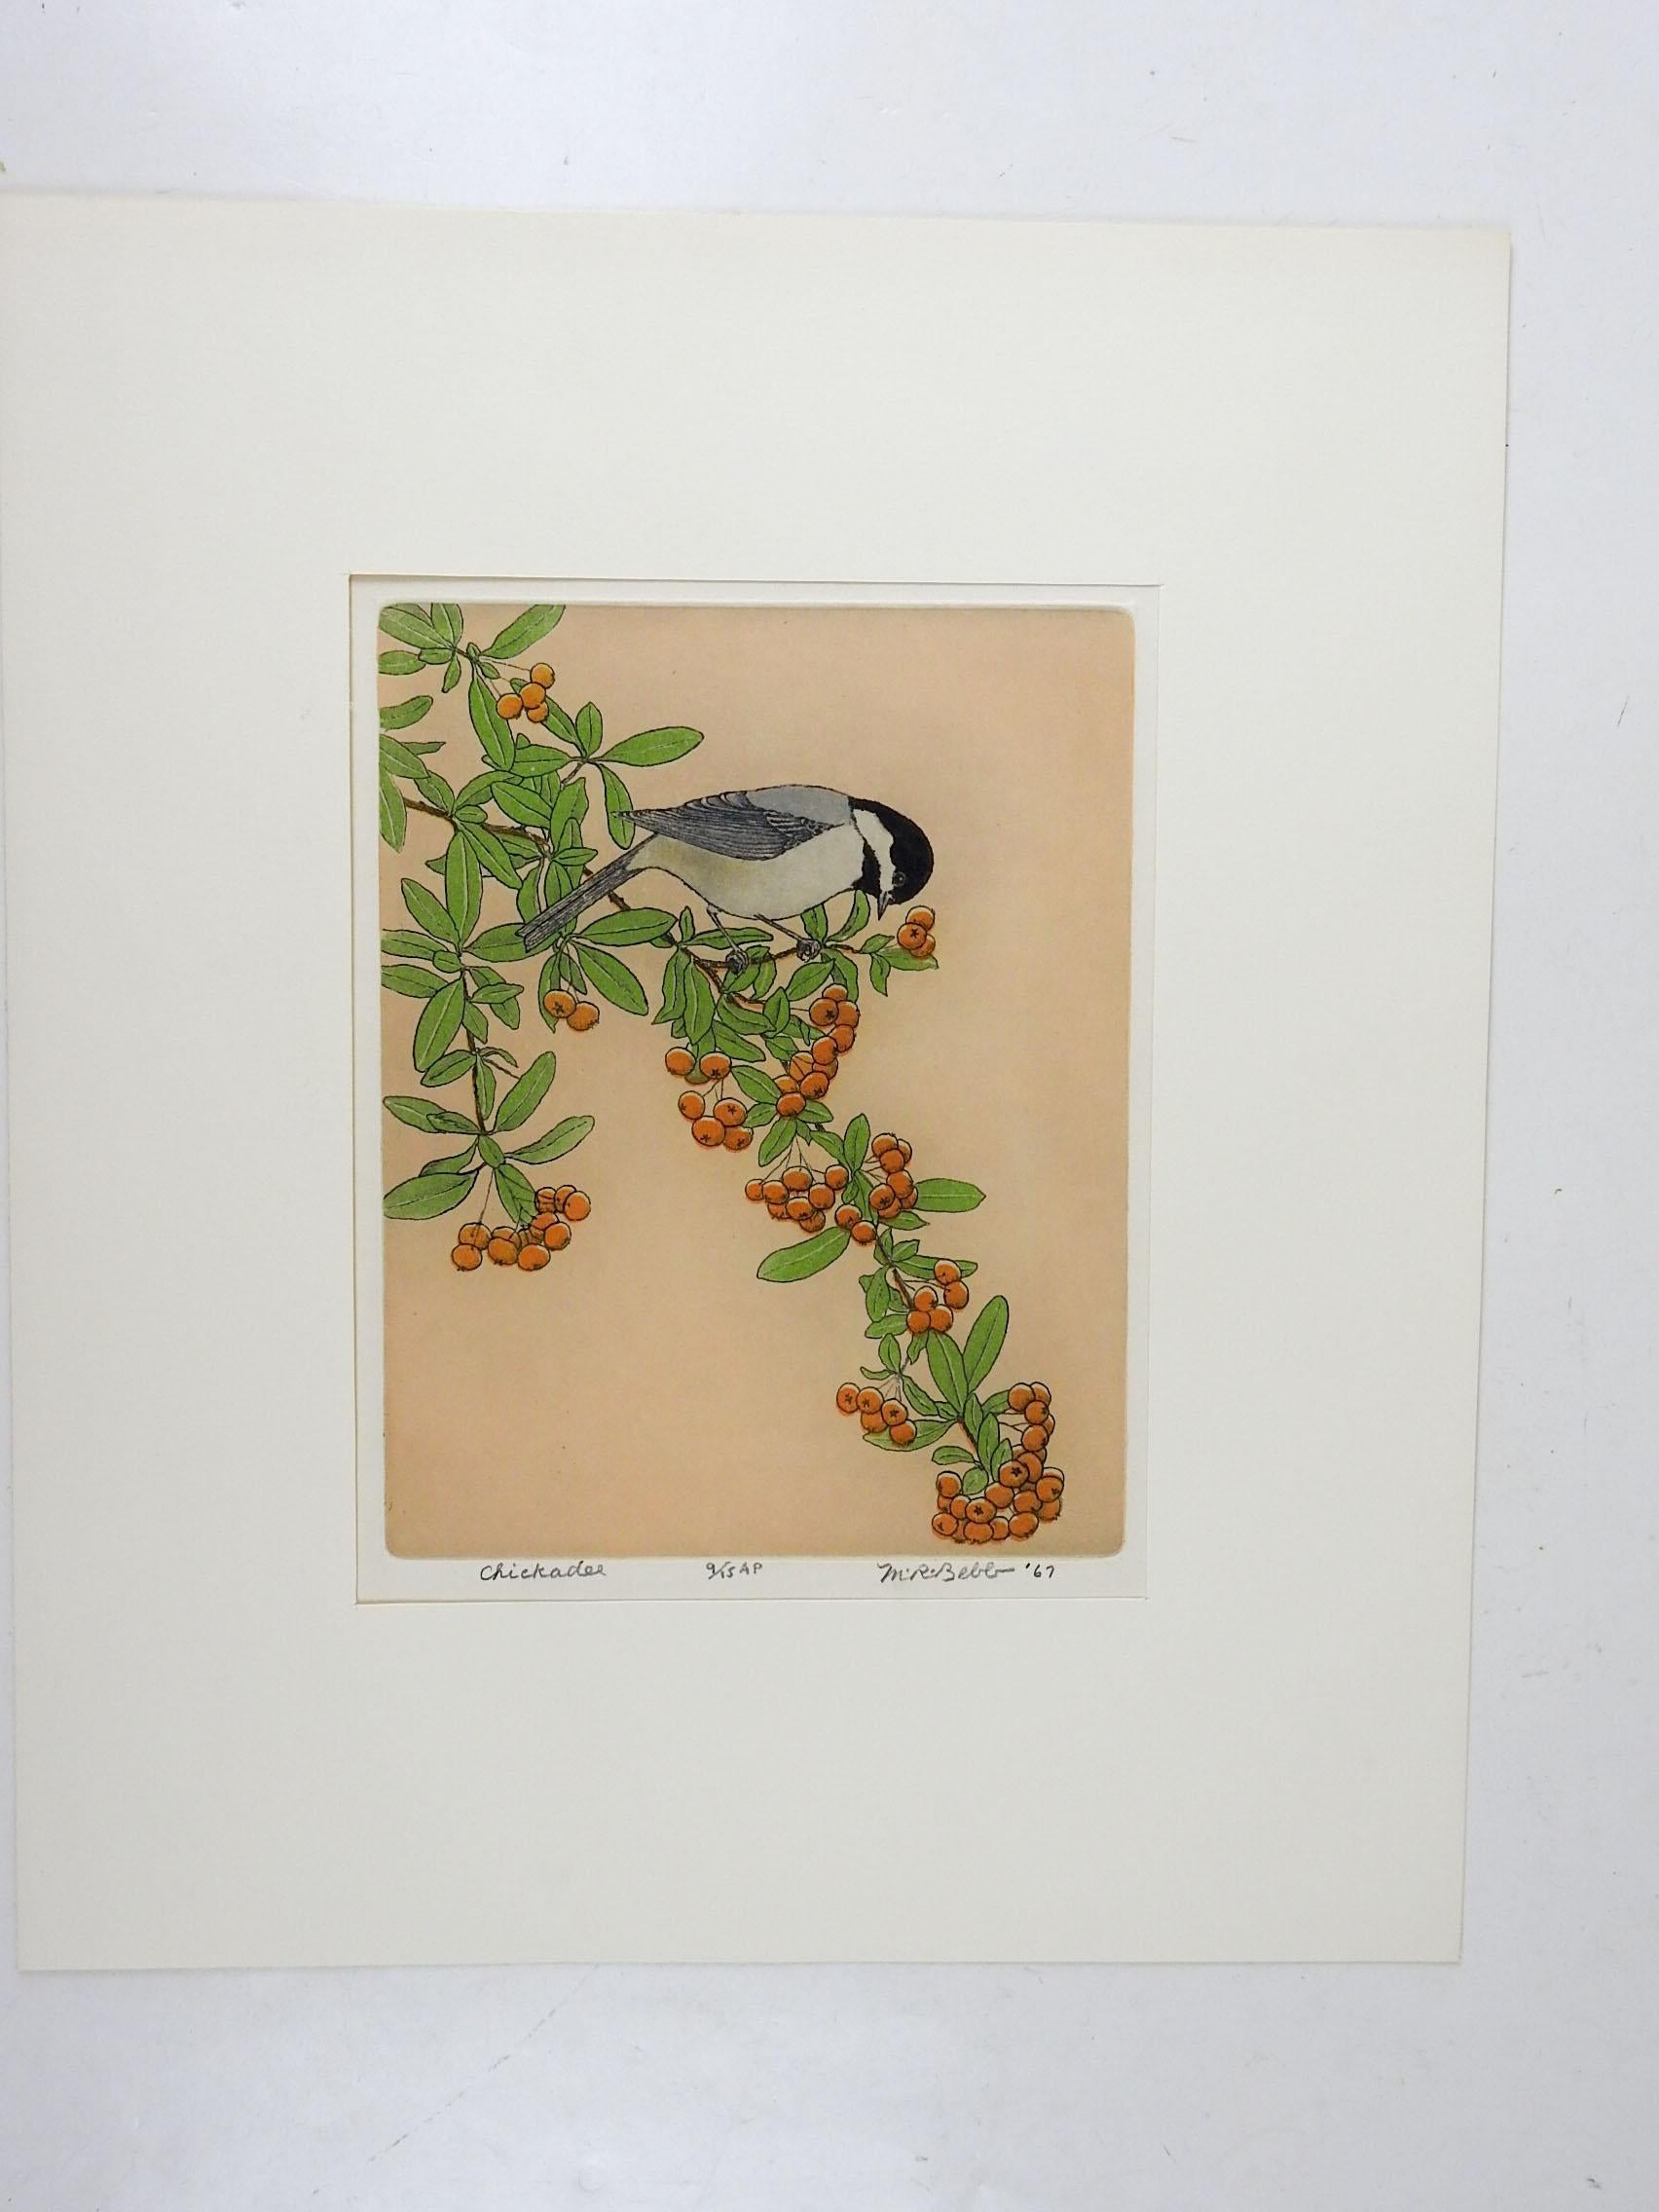 Vintage 1967 Maurice R. Bebbs (1891-1985) color aquatint etching on paper. Signed, titled Chickadee, numbered 9/15 artist proof in pencil along lower margin. Unframed, displayed in folded cardstock mat, opening size 7.7.5